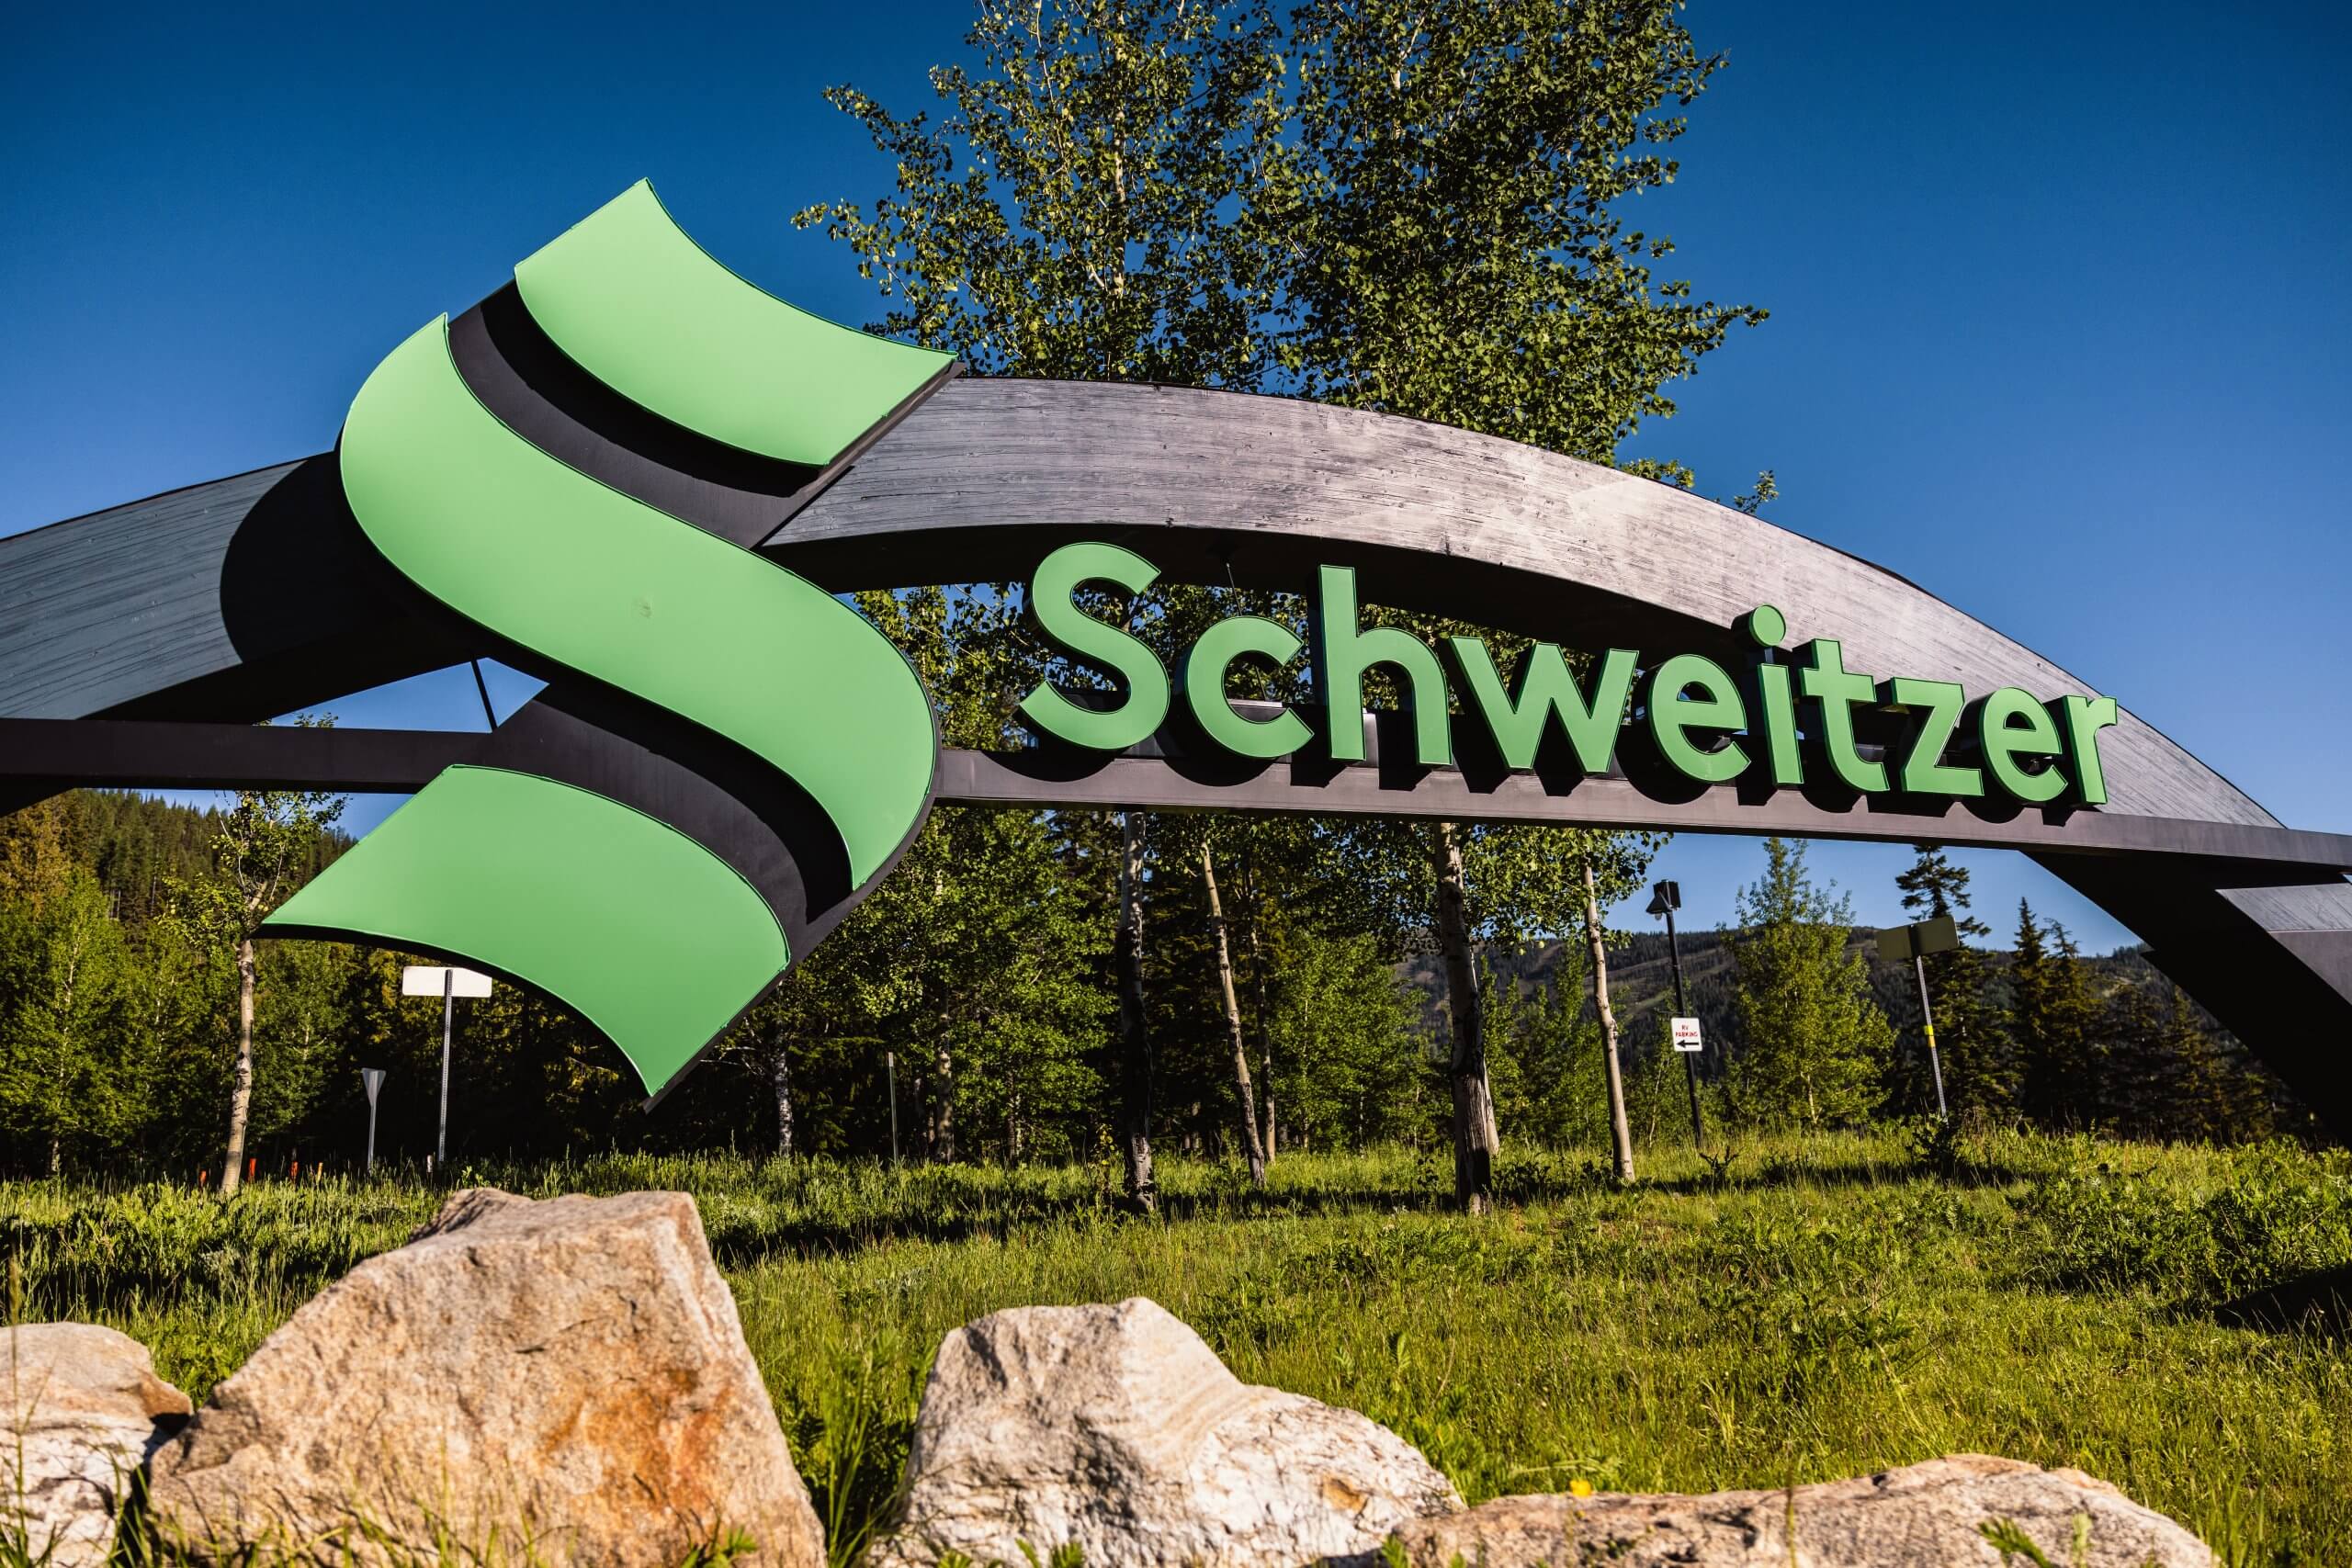 A green and metal sign for Schweitzer.